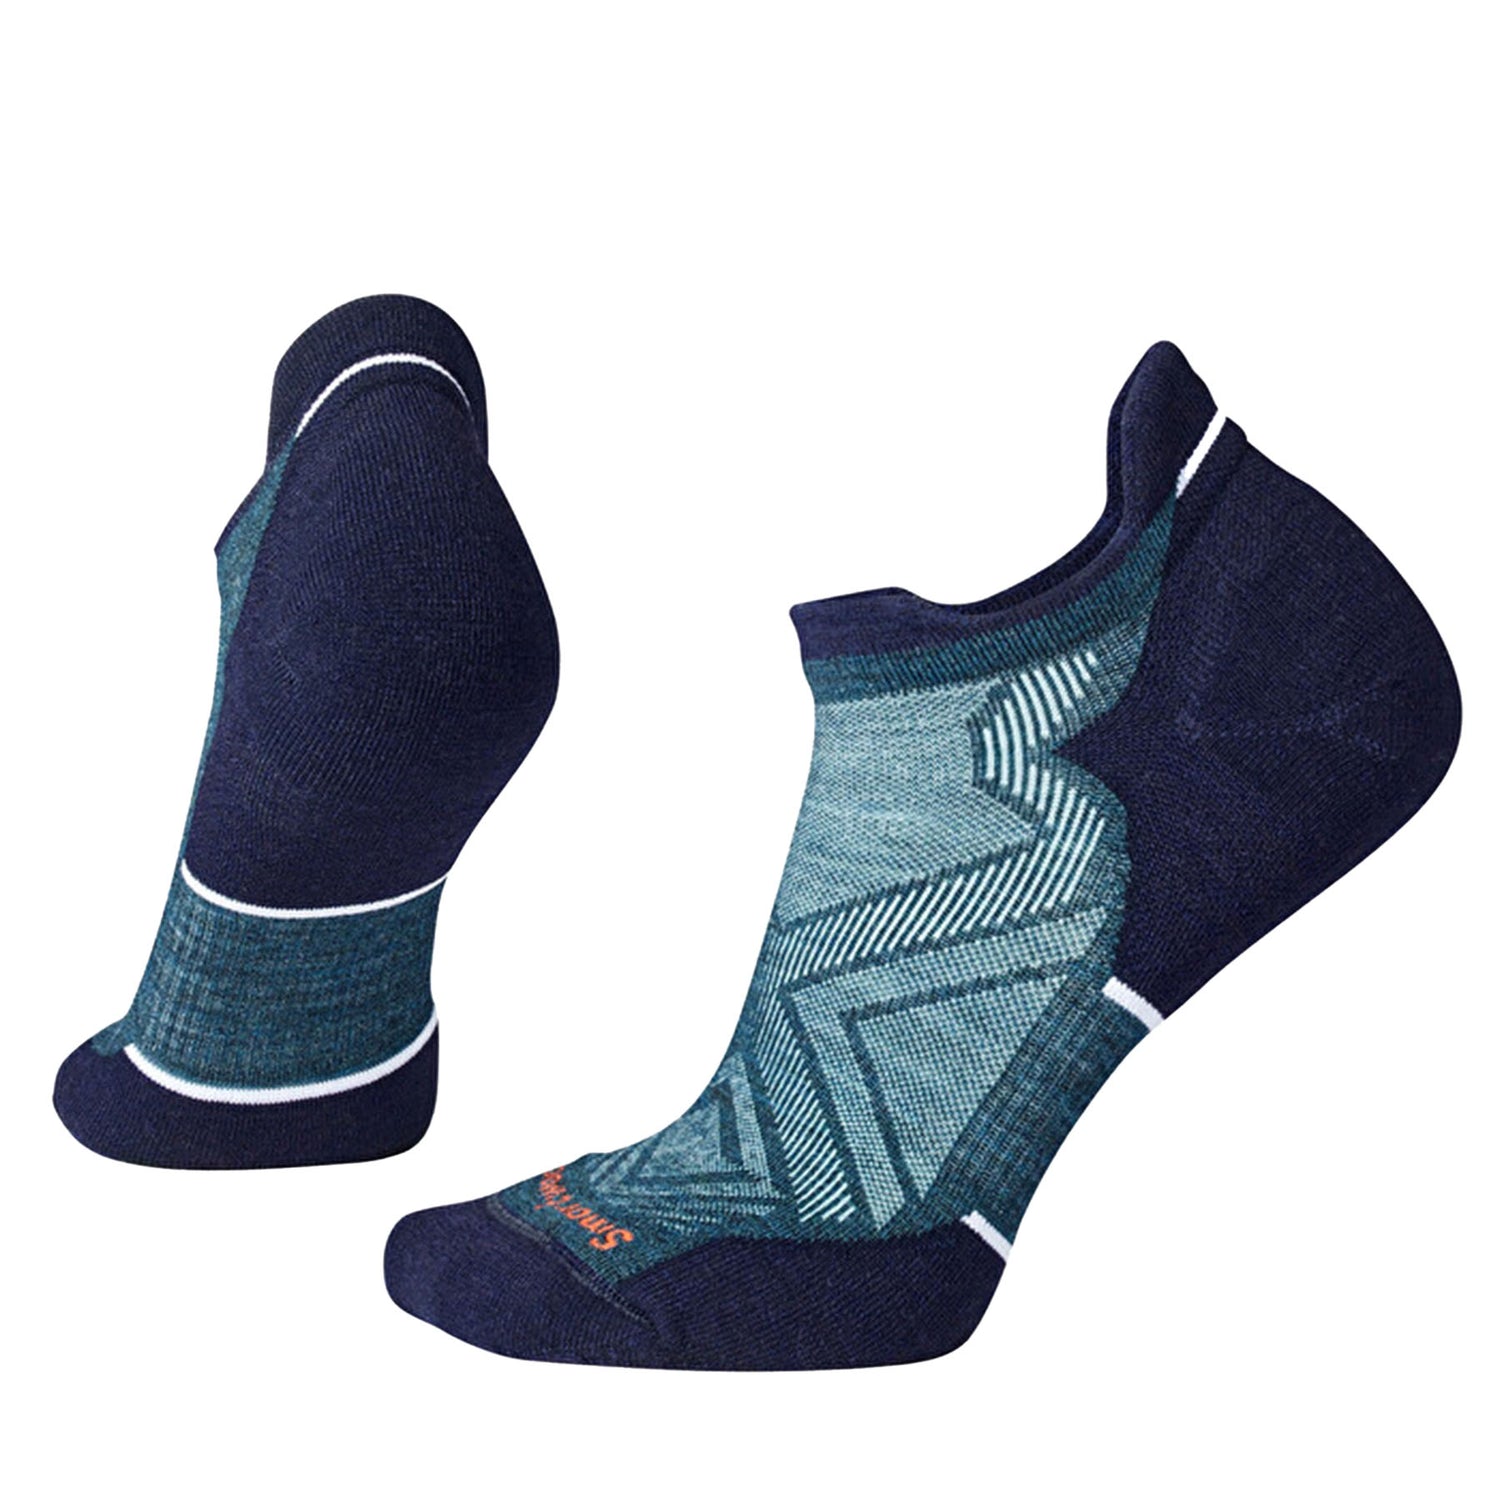 Smartwool Women's Run Targeted Cushion Low Ankle Socks 